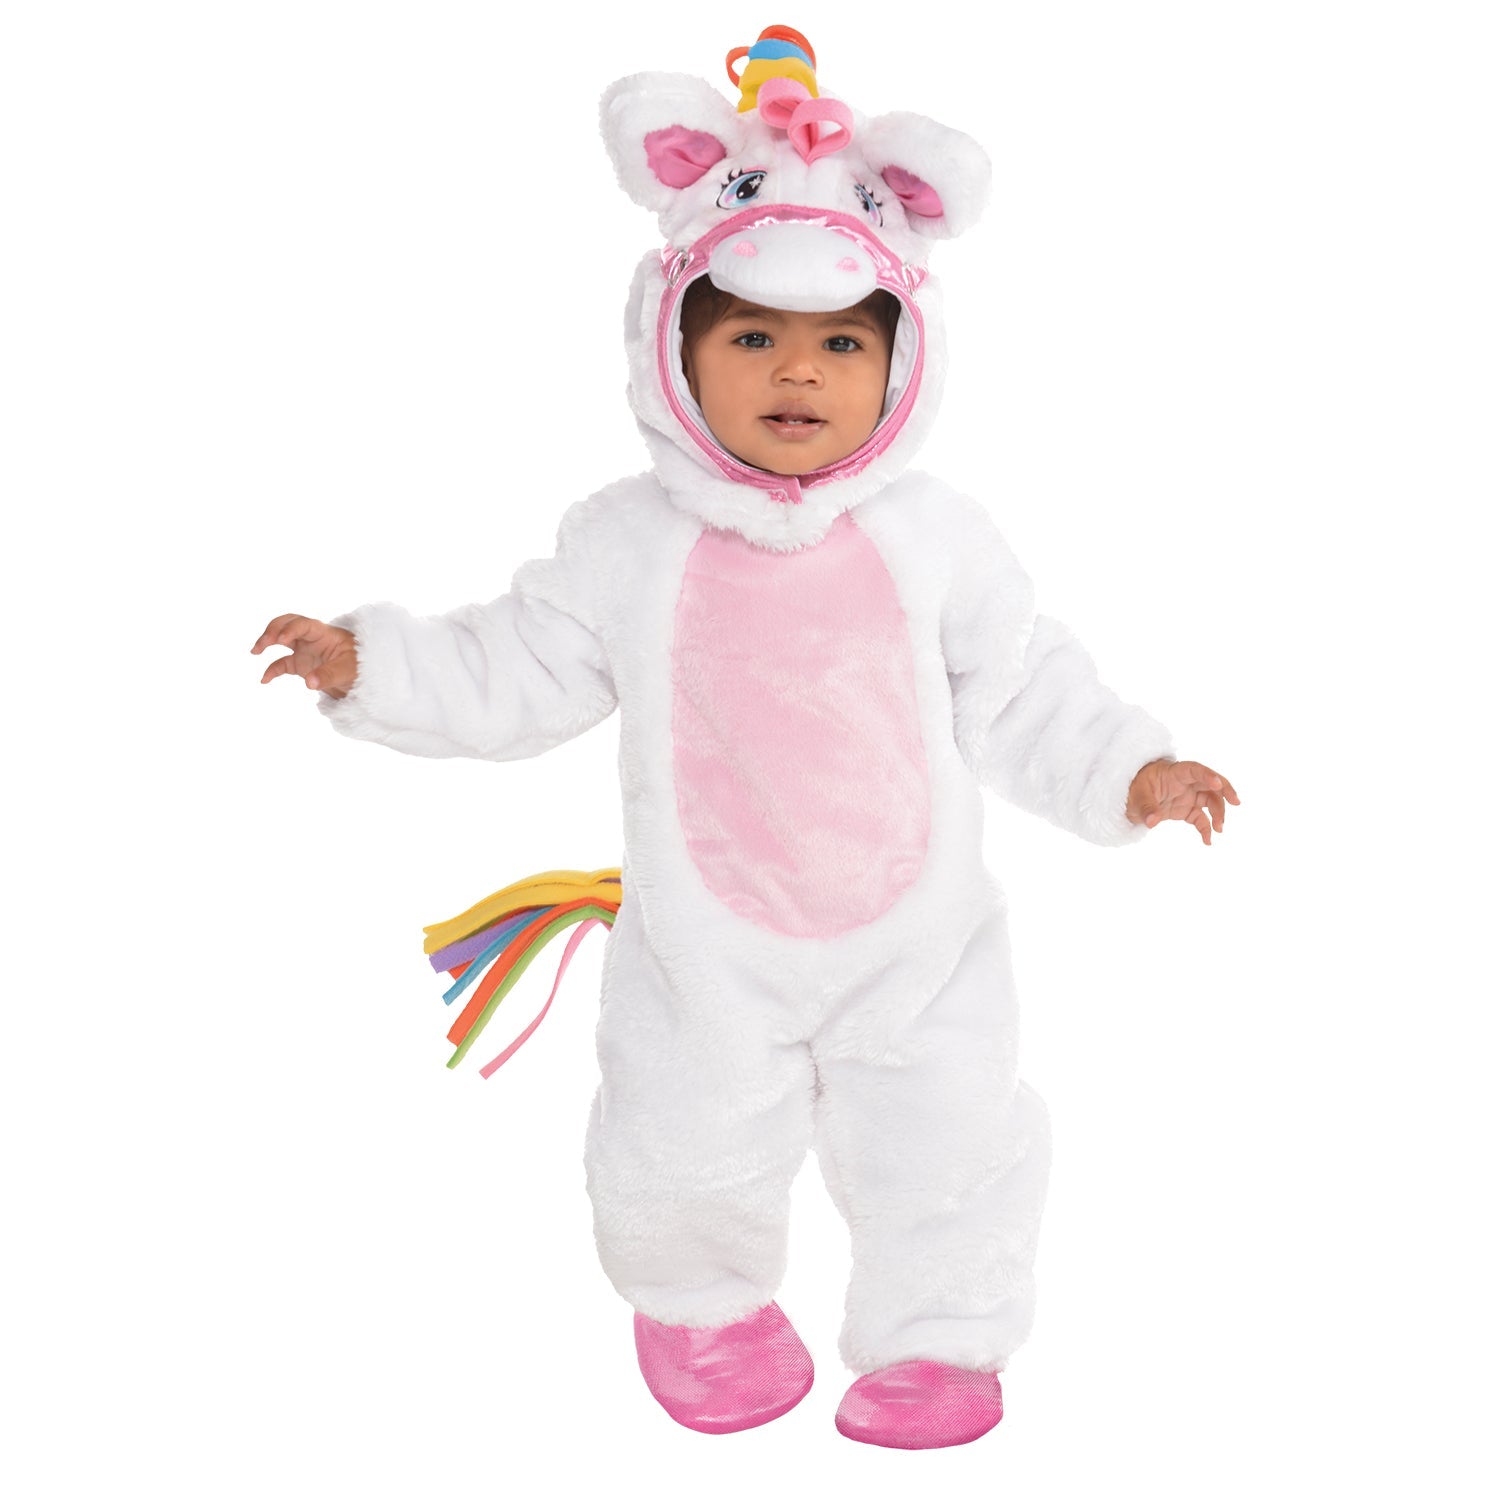 Baby Mystical Pony Costume includes jumpsuit, hood and booties